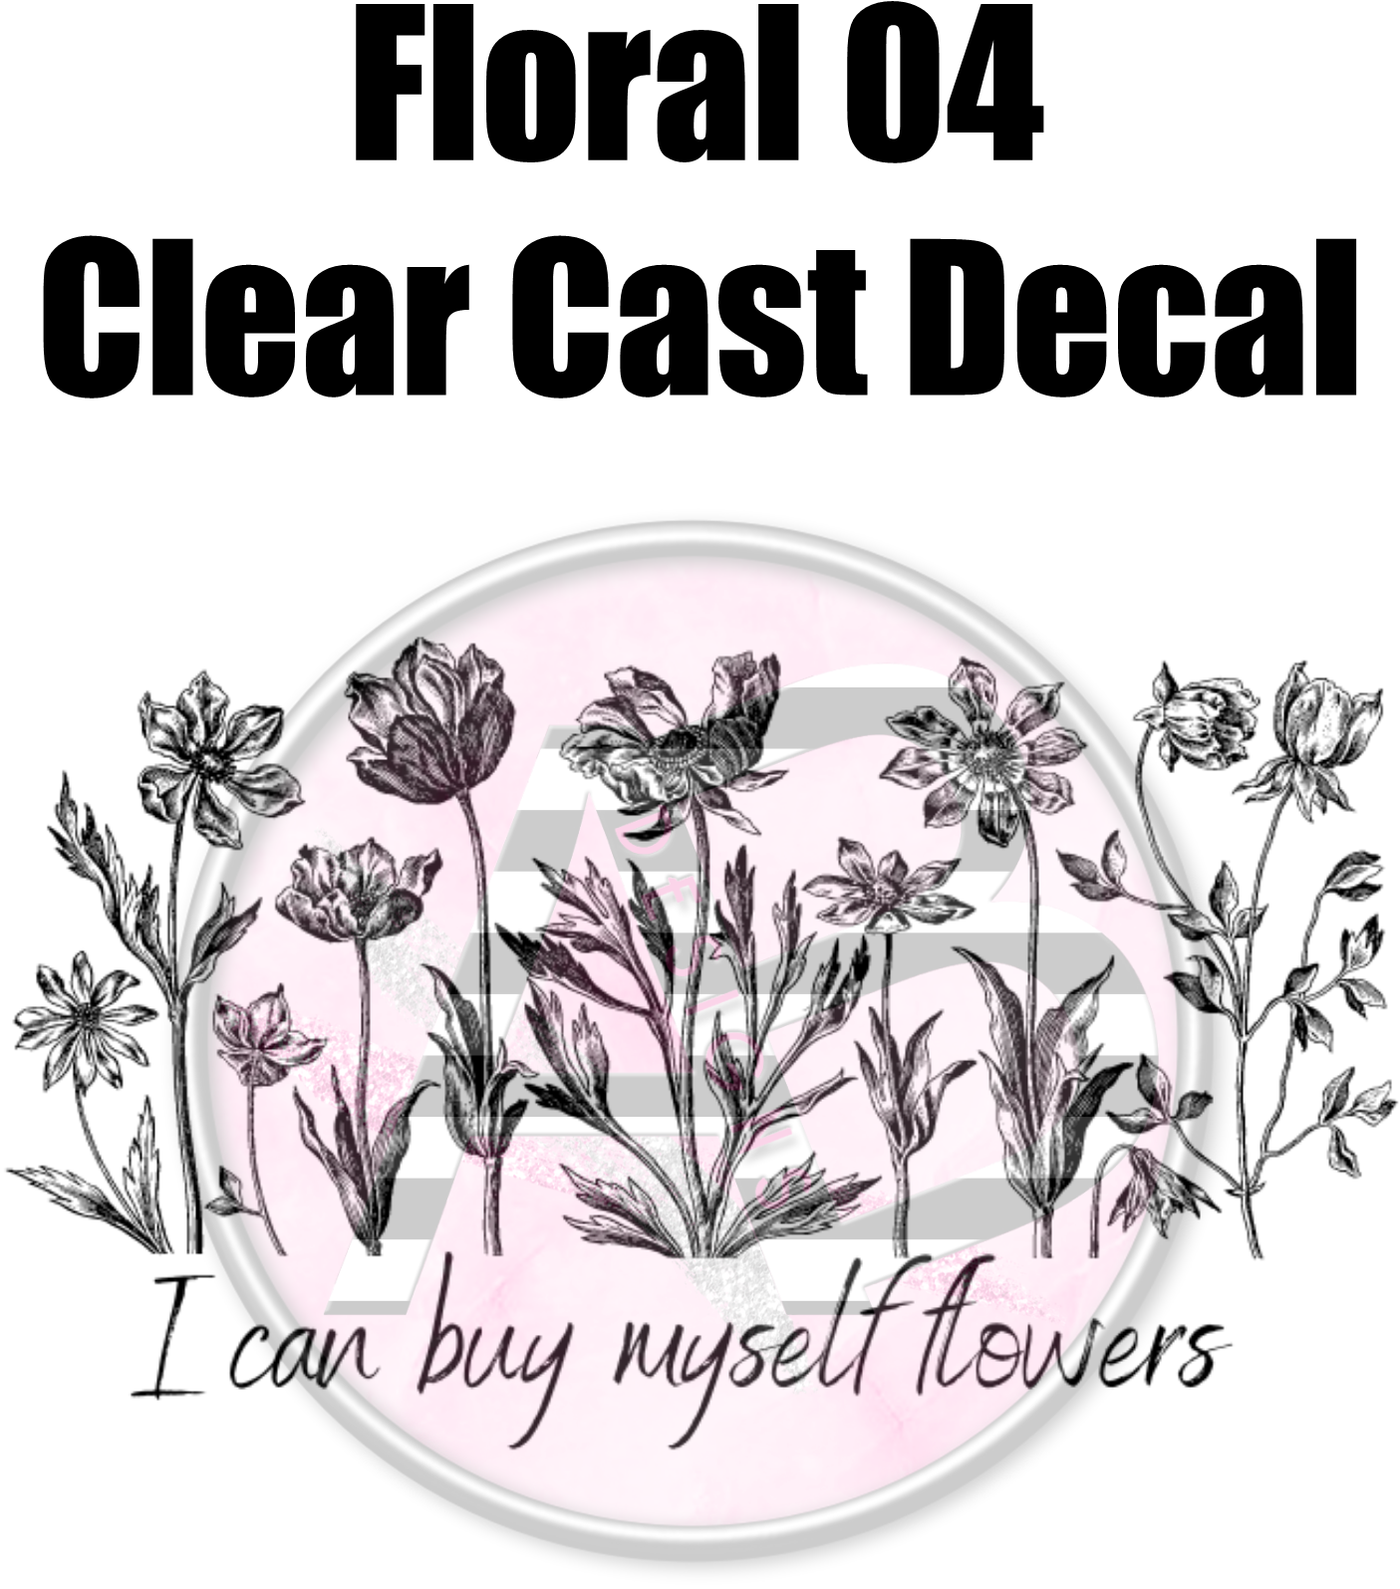 Floral 04 - Clear Cast Decal